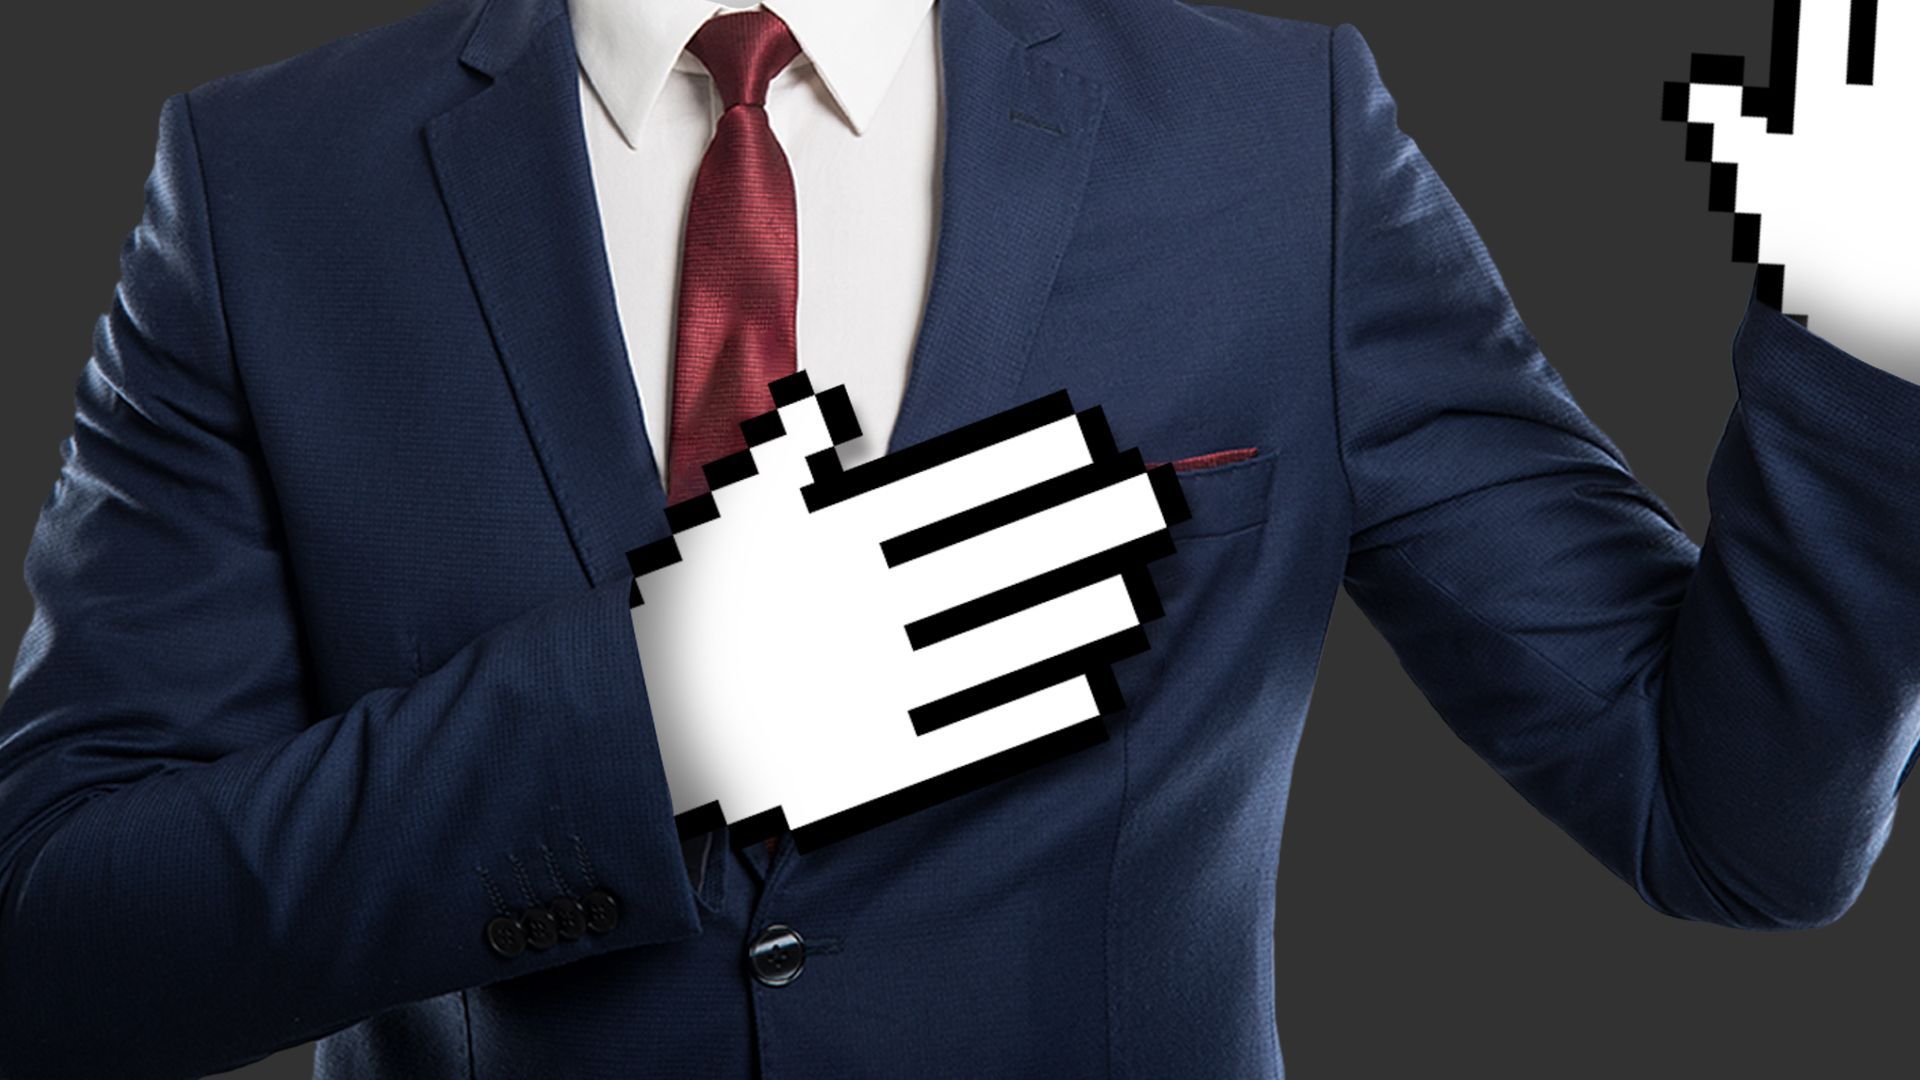 Illustration of a person wearing a suit with a hand shaped cursor over their heart and another raised in an oath-taking position